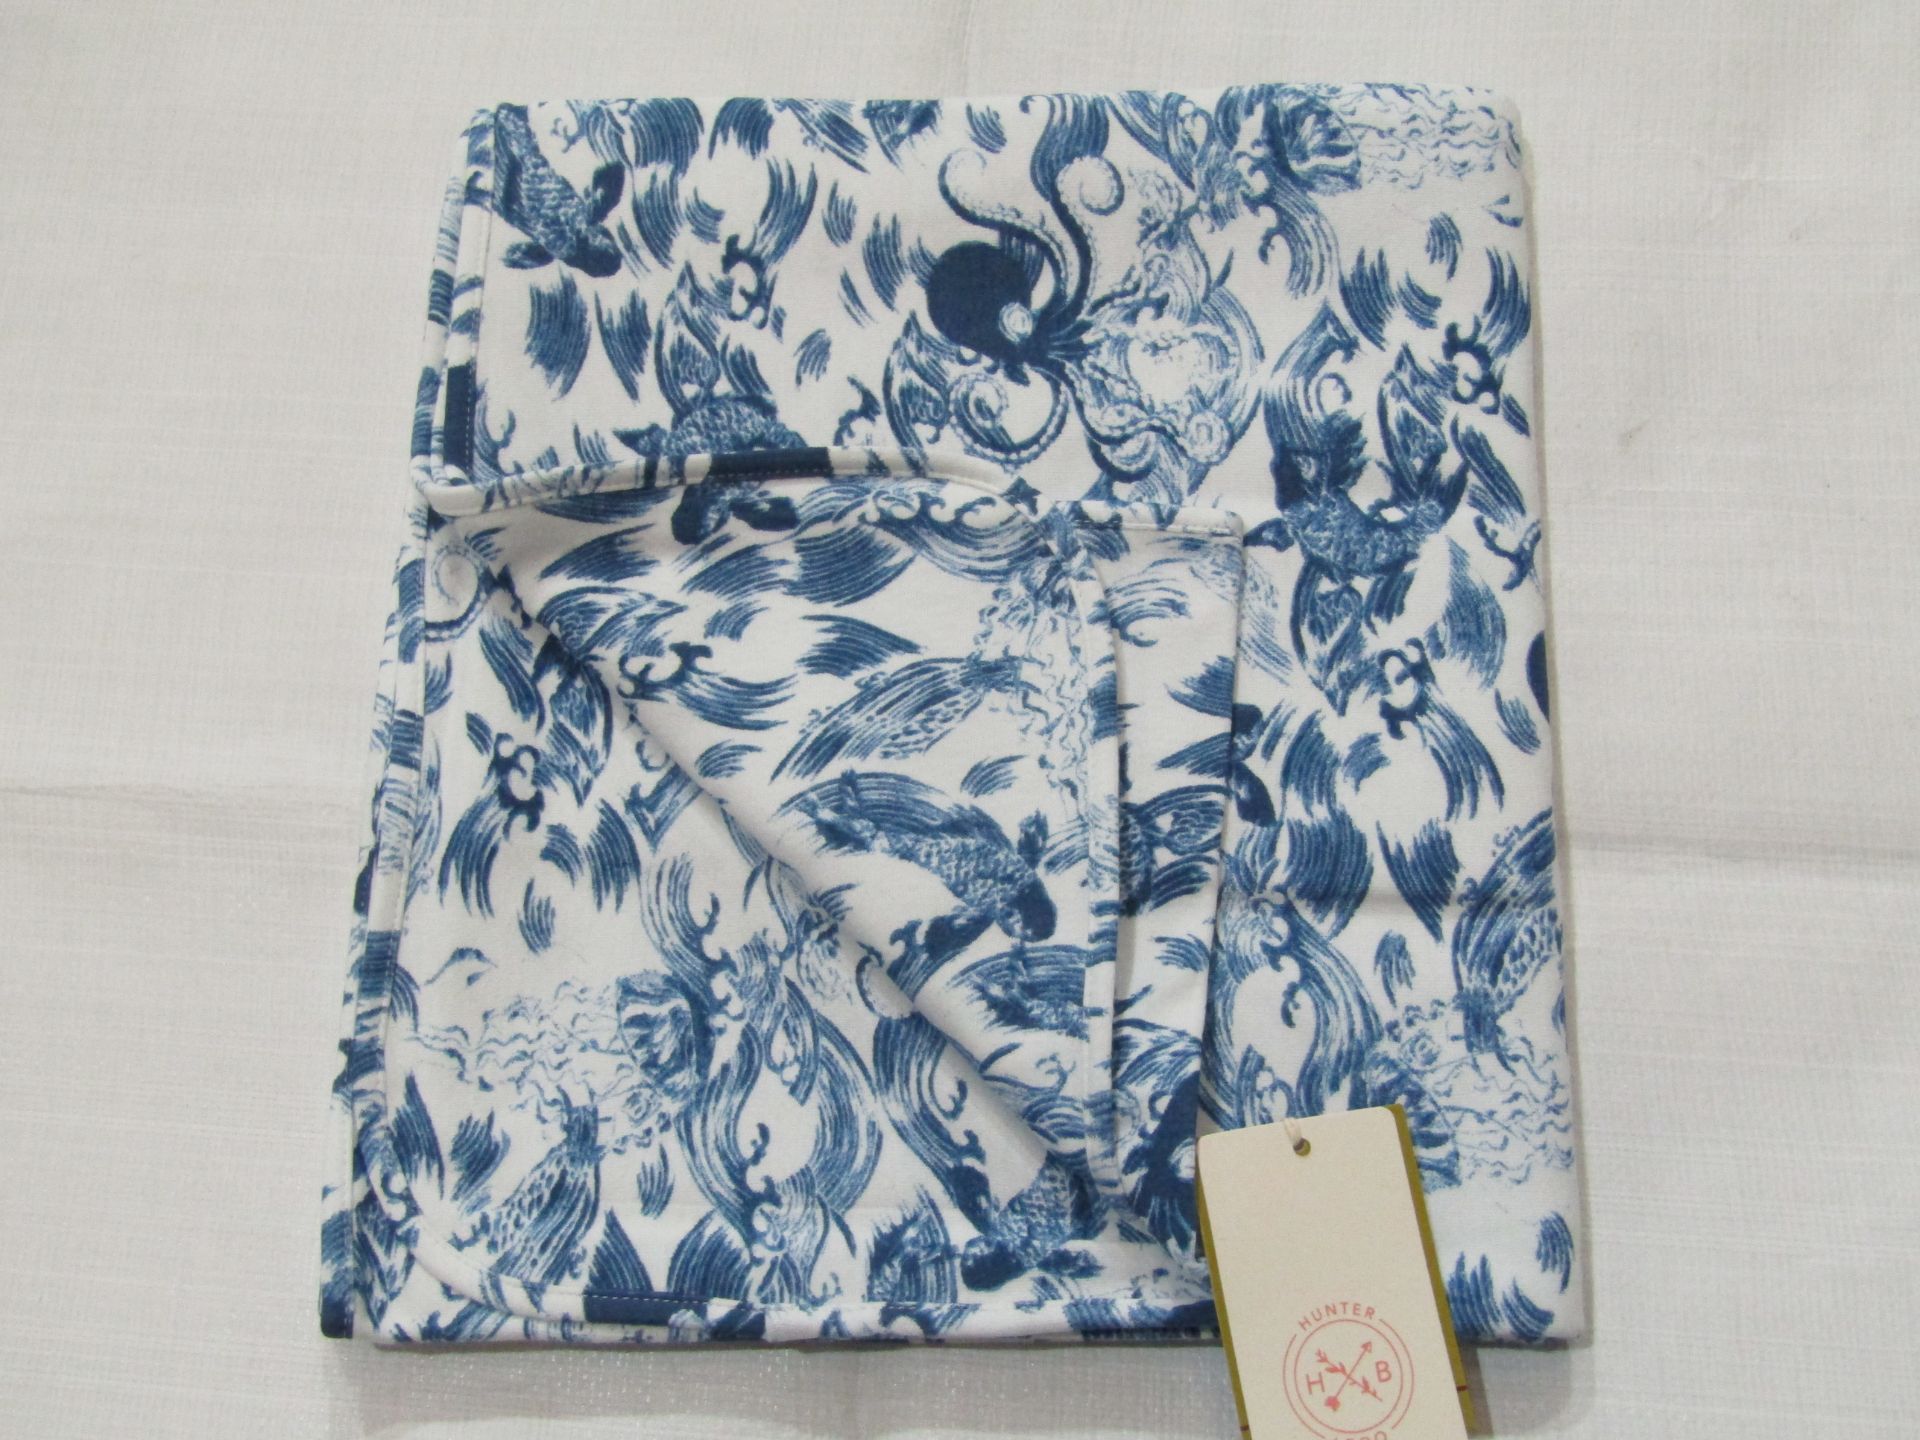 Hunter & Boo Blanket Kayio Print Approx Size 120 X 90 CM 100 % Organic Cotton New & Packaged RRP £